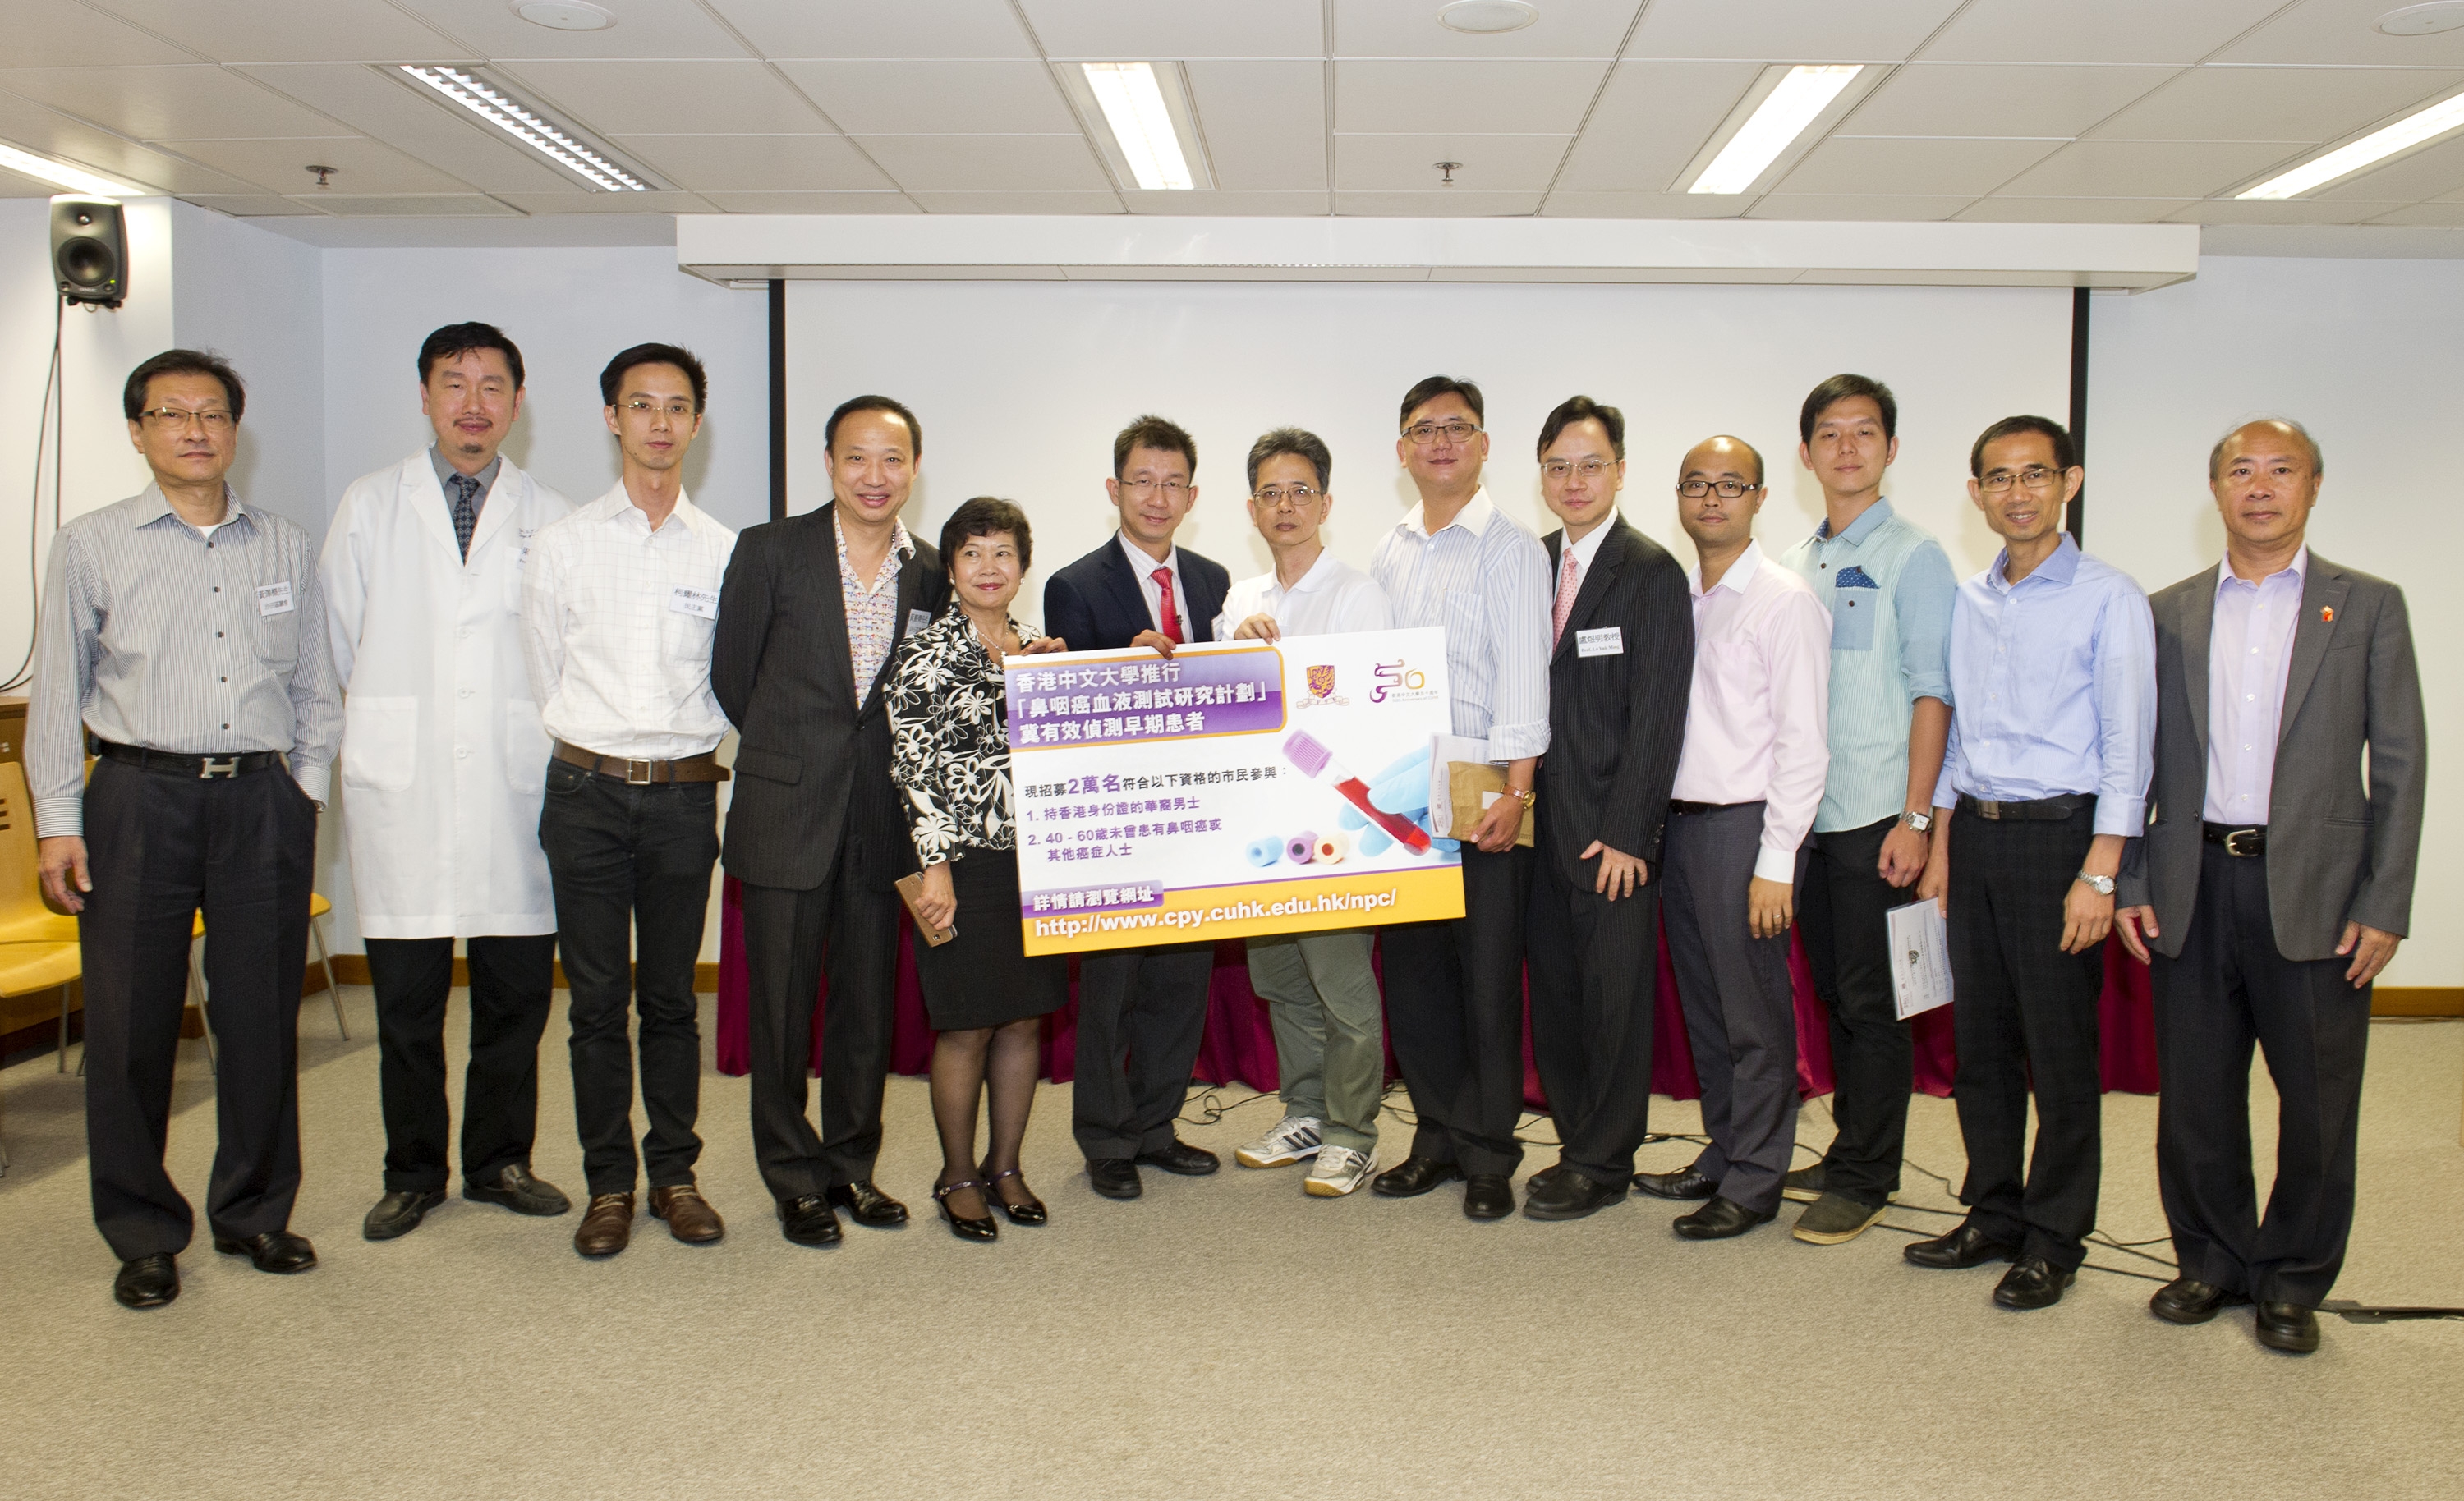 CUHK Professors thanks the representatives of the supporting organizations for their generous support to CUHK's NPC screening study